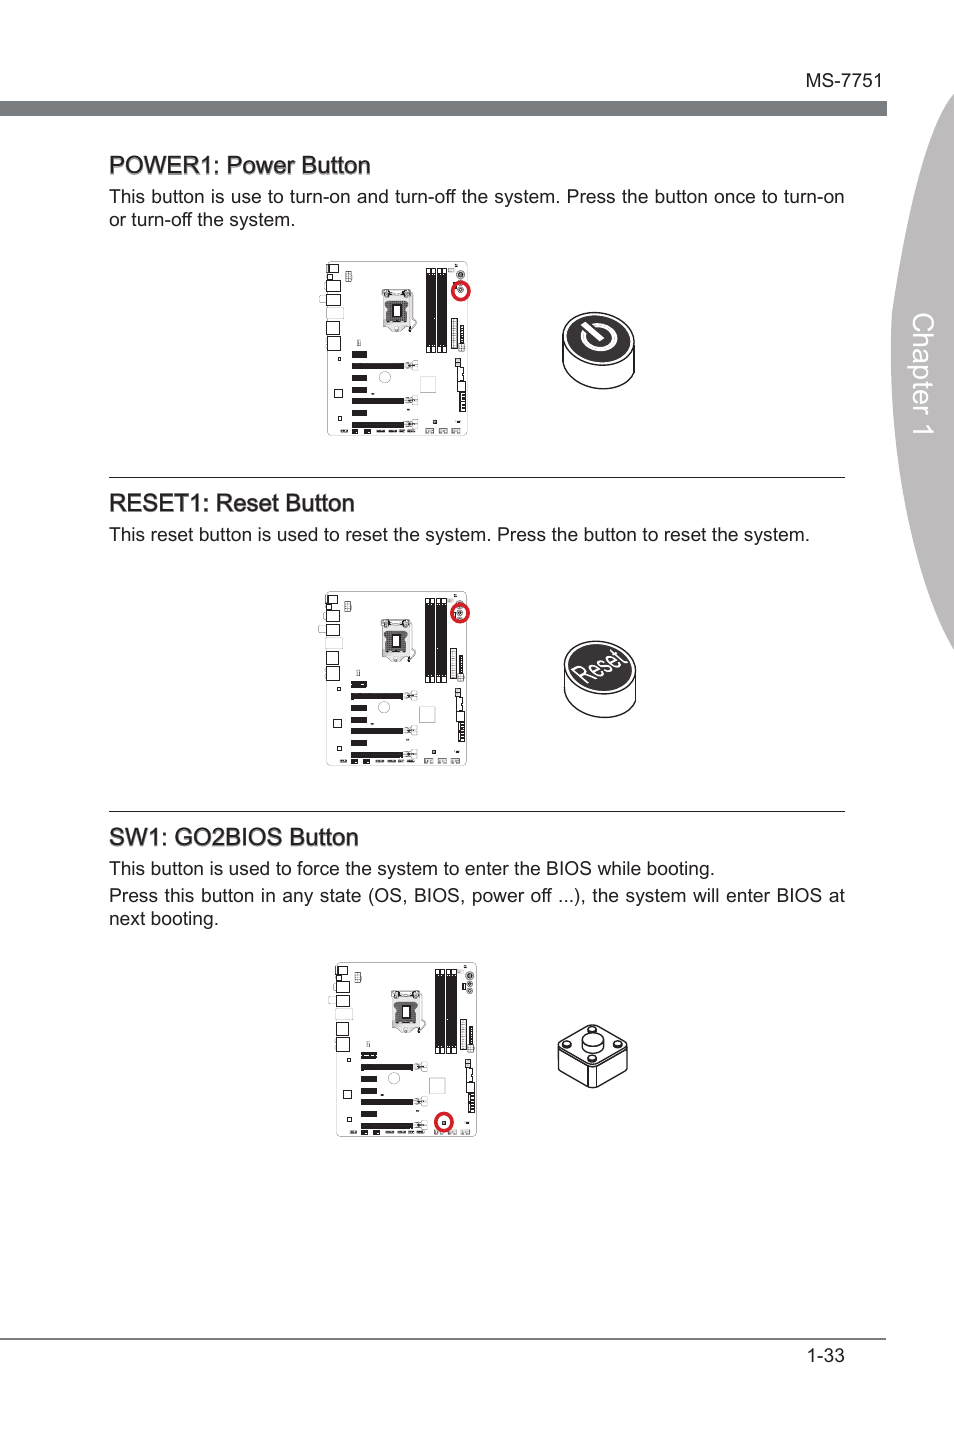 Power1, Power button, Reset1 | MSI Z77 MPOWER User Manual | Page 45 / 100 |  Original mode